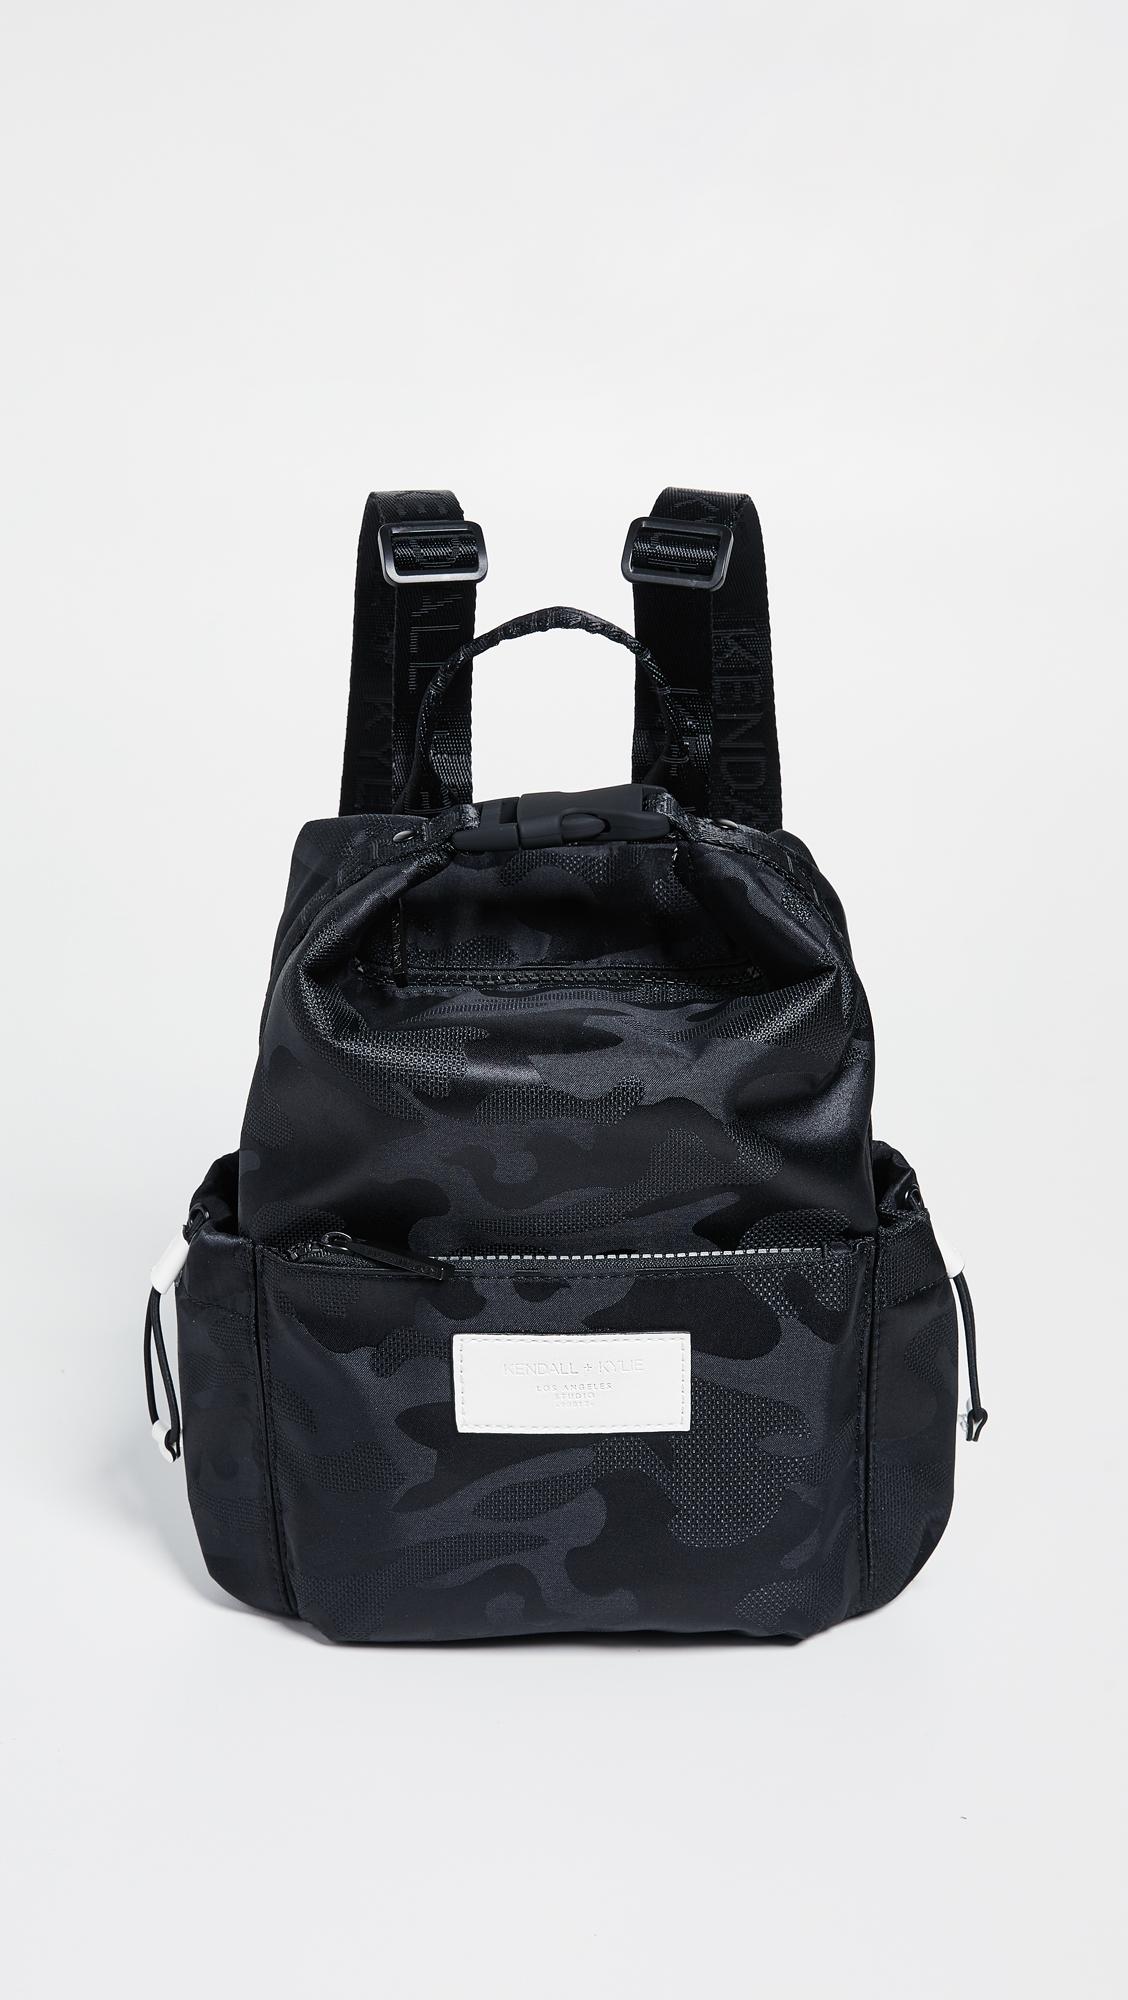 Kendall + Kylie Gabby Backpack in Black Camo (Black) | Lyst